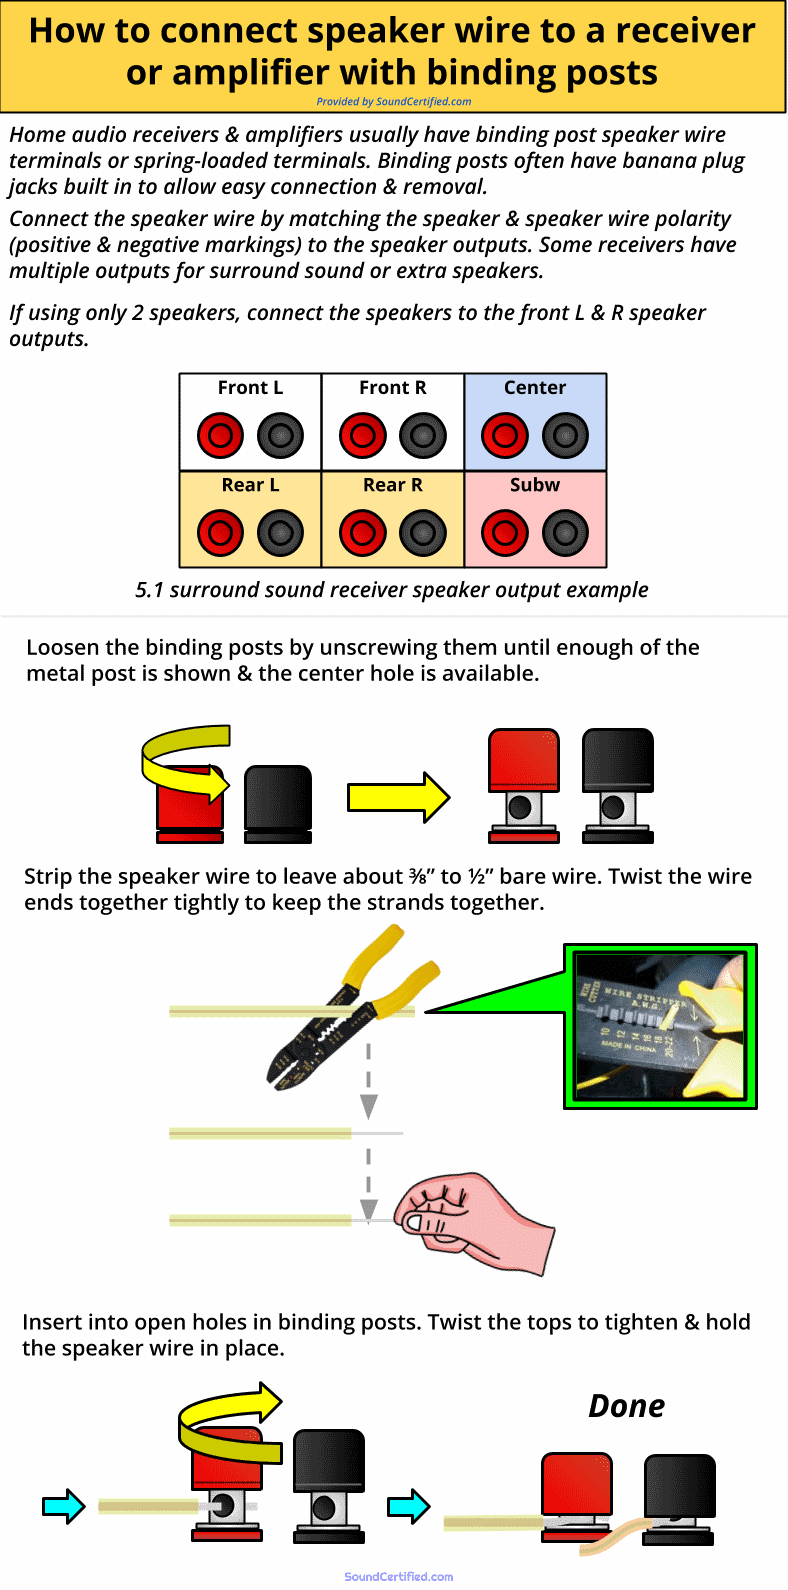 How to connect speaker wire to receiver or home amp with binding posts diagram